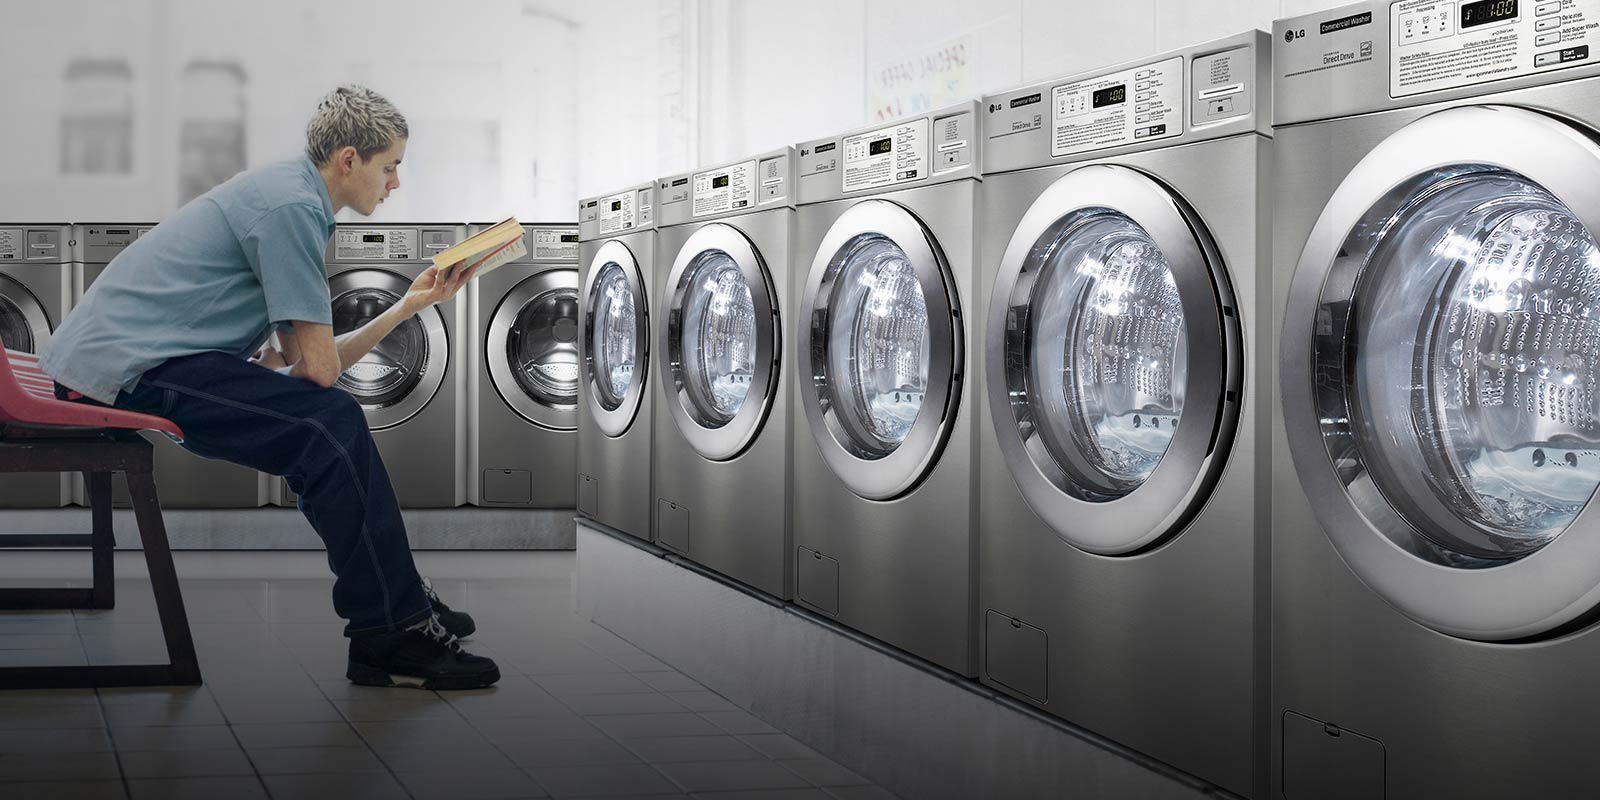 Customers in your Laundry Business